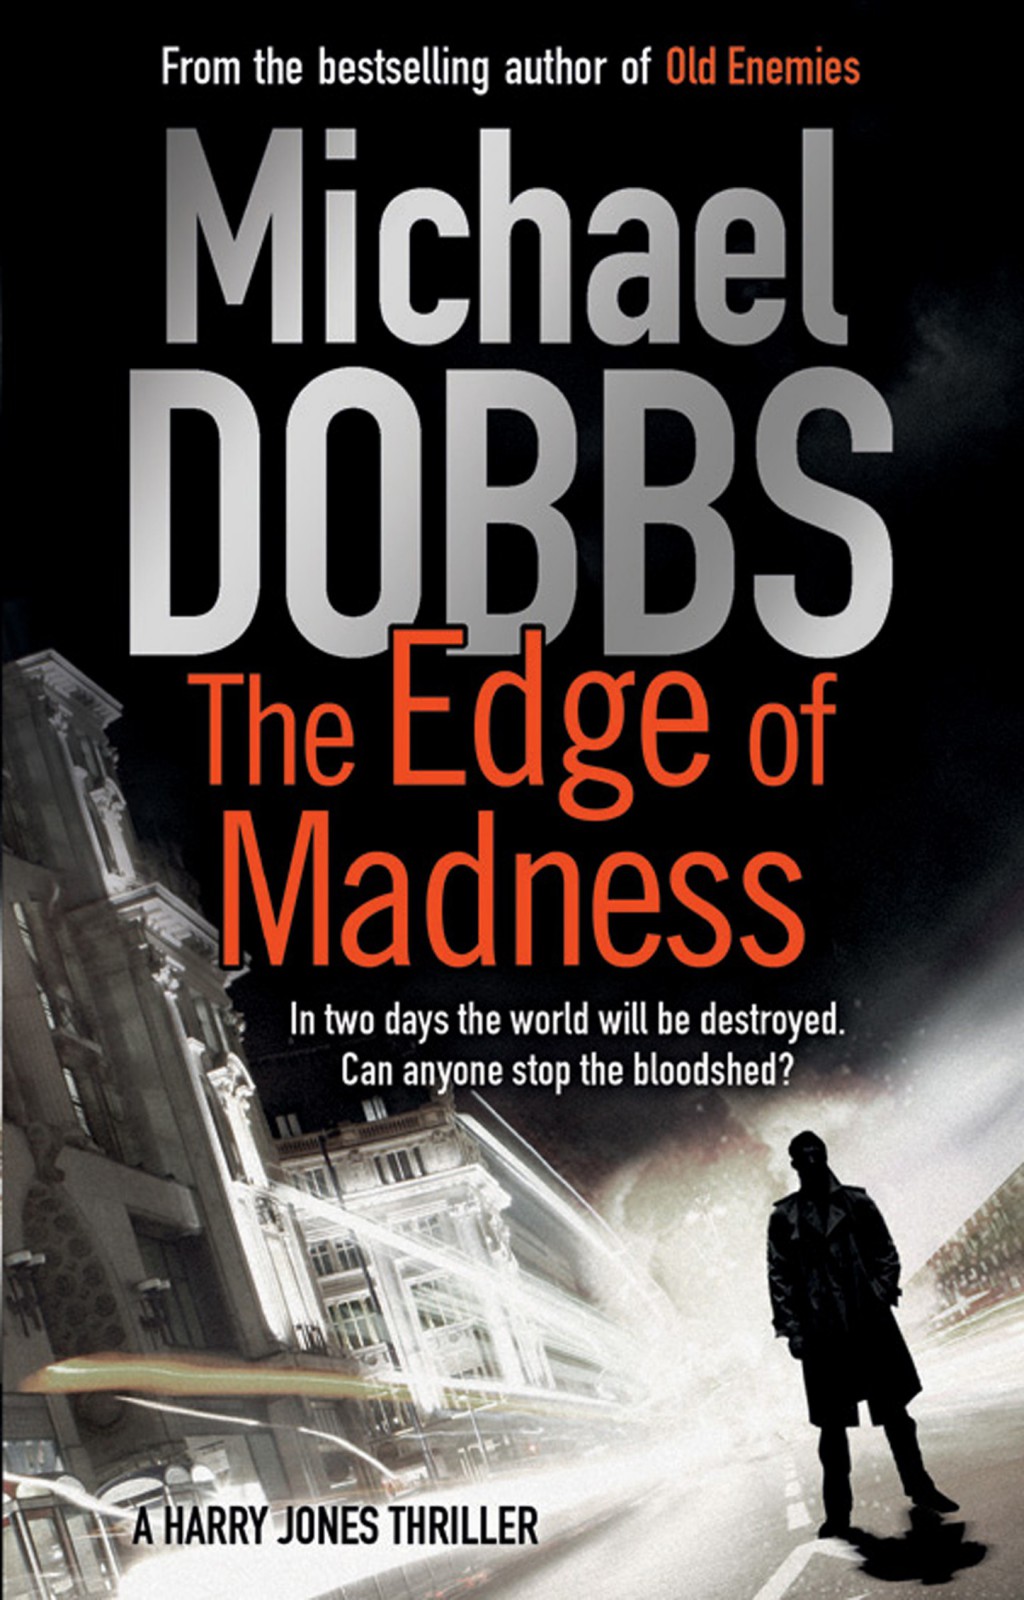 The Edge of Madness by Michael Dobbs